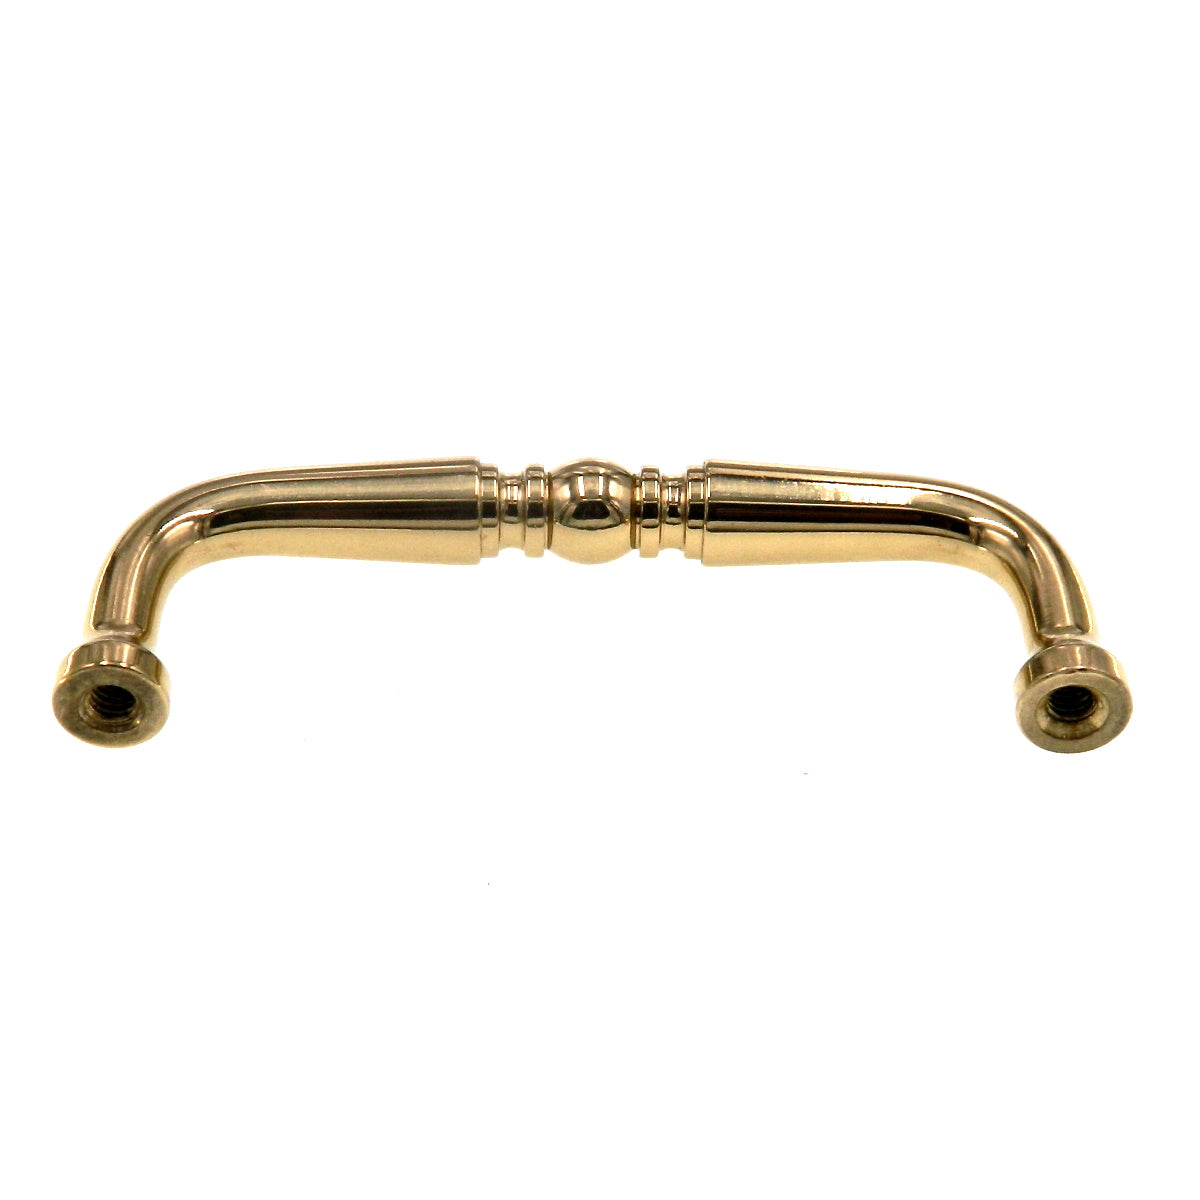 Amerock Allison Polished Brass Solid Brass 3" Ctr.  Cabinet Arch Pull Handle 553